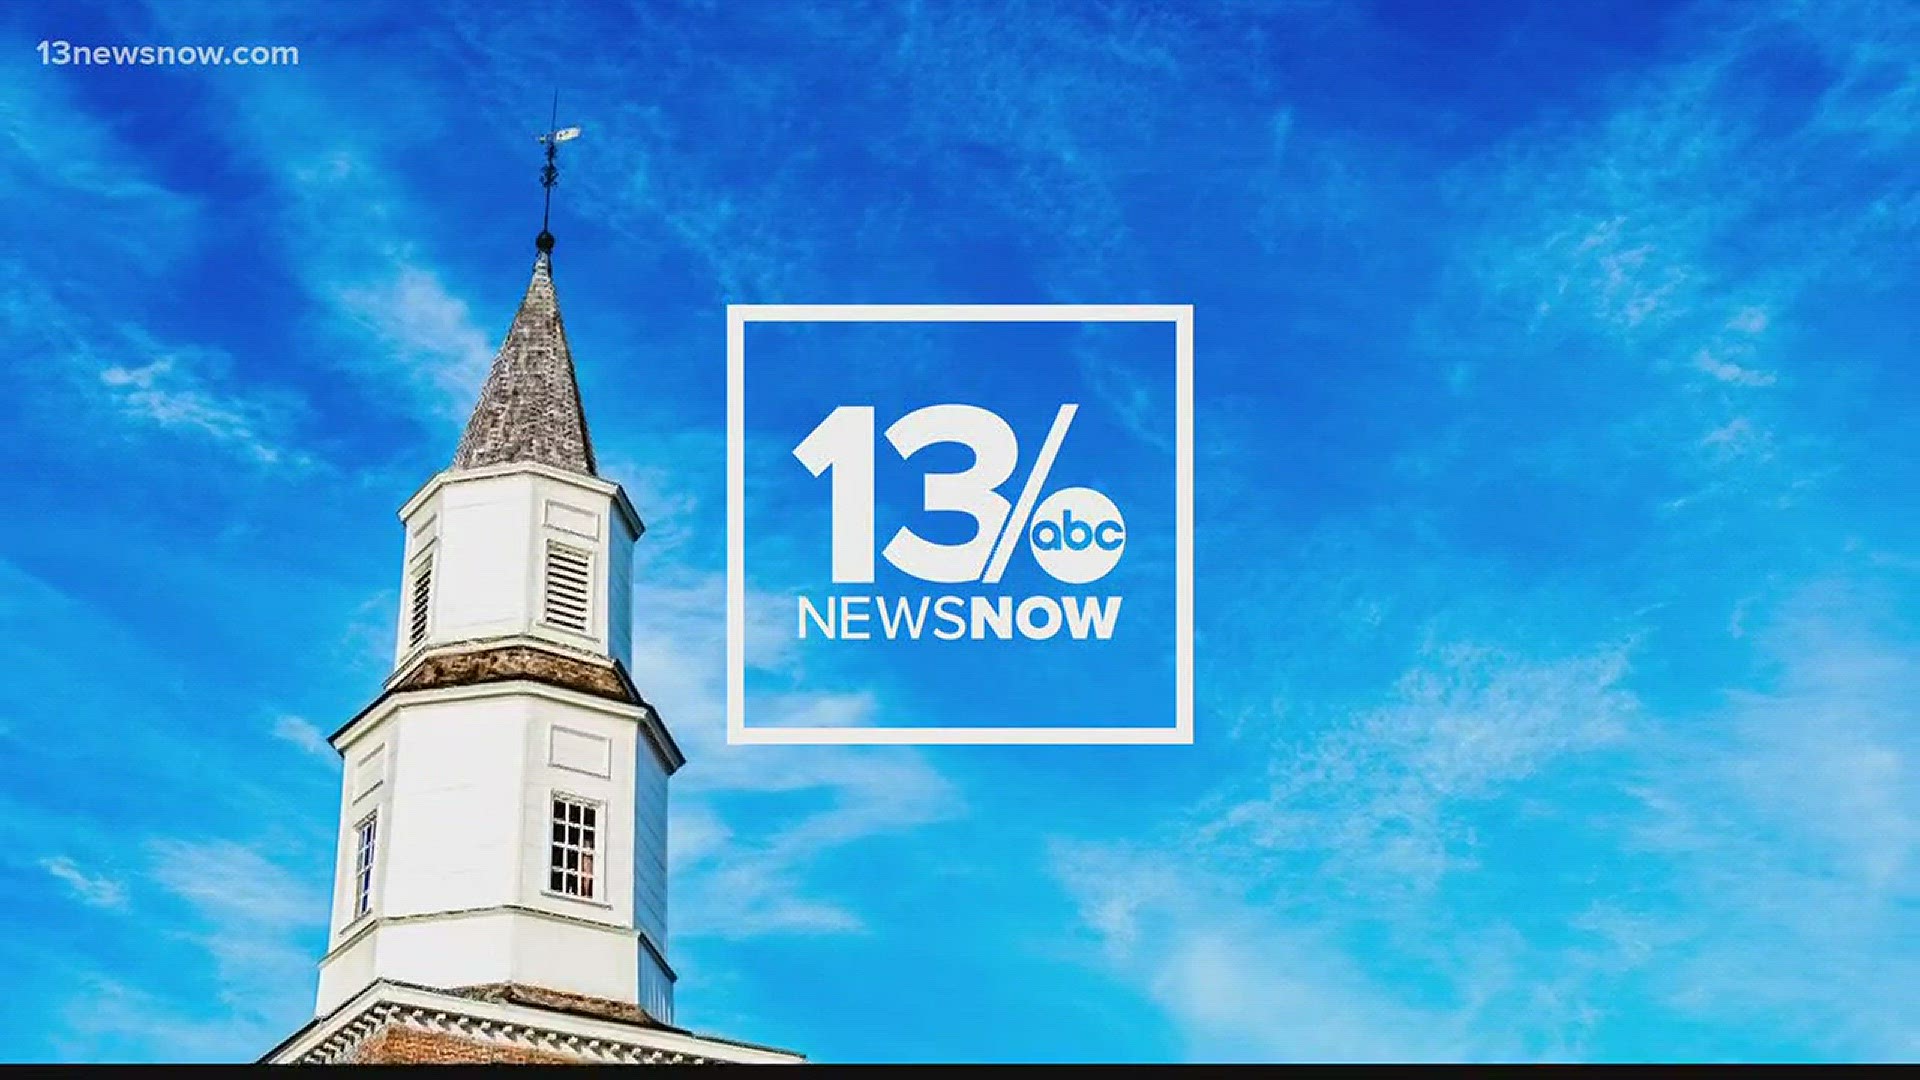 13News Now has a new look!